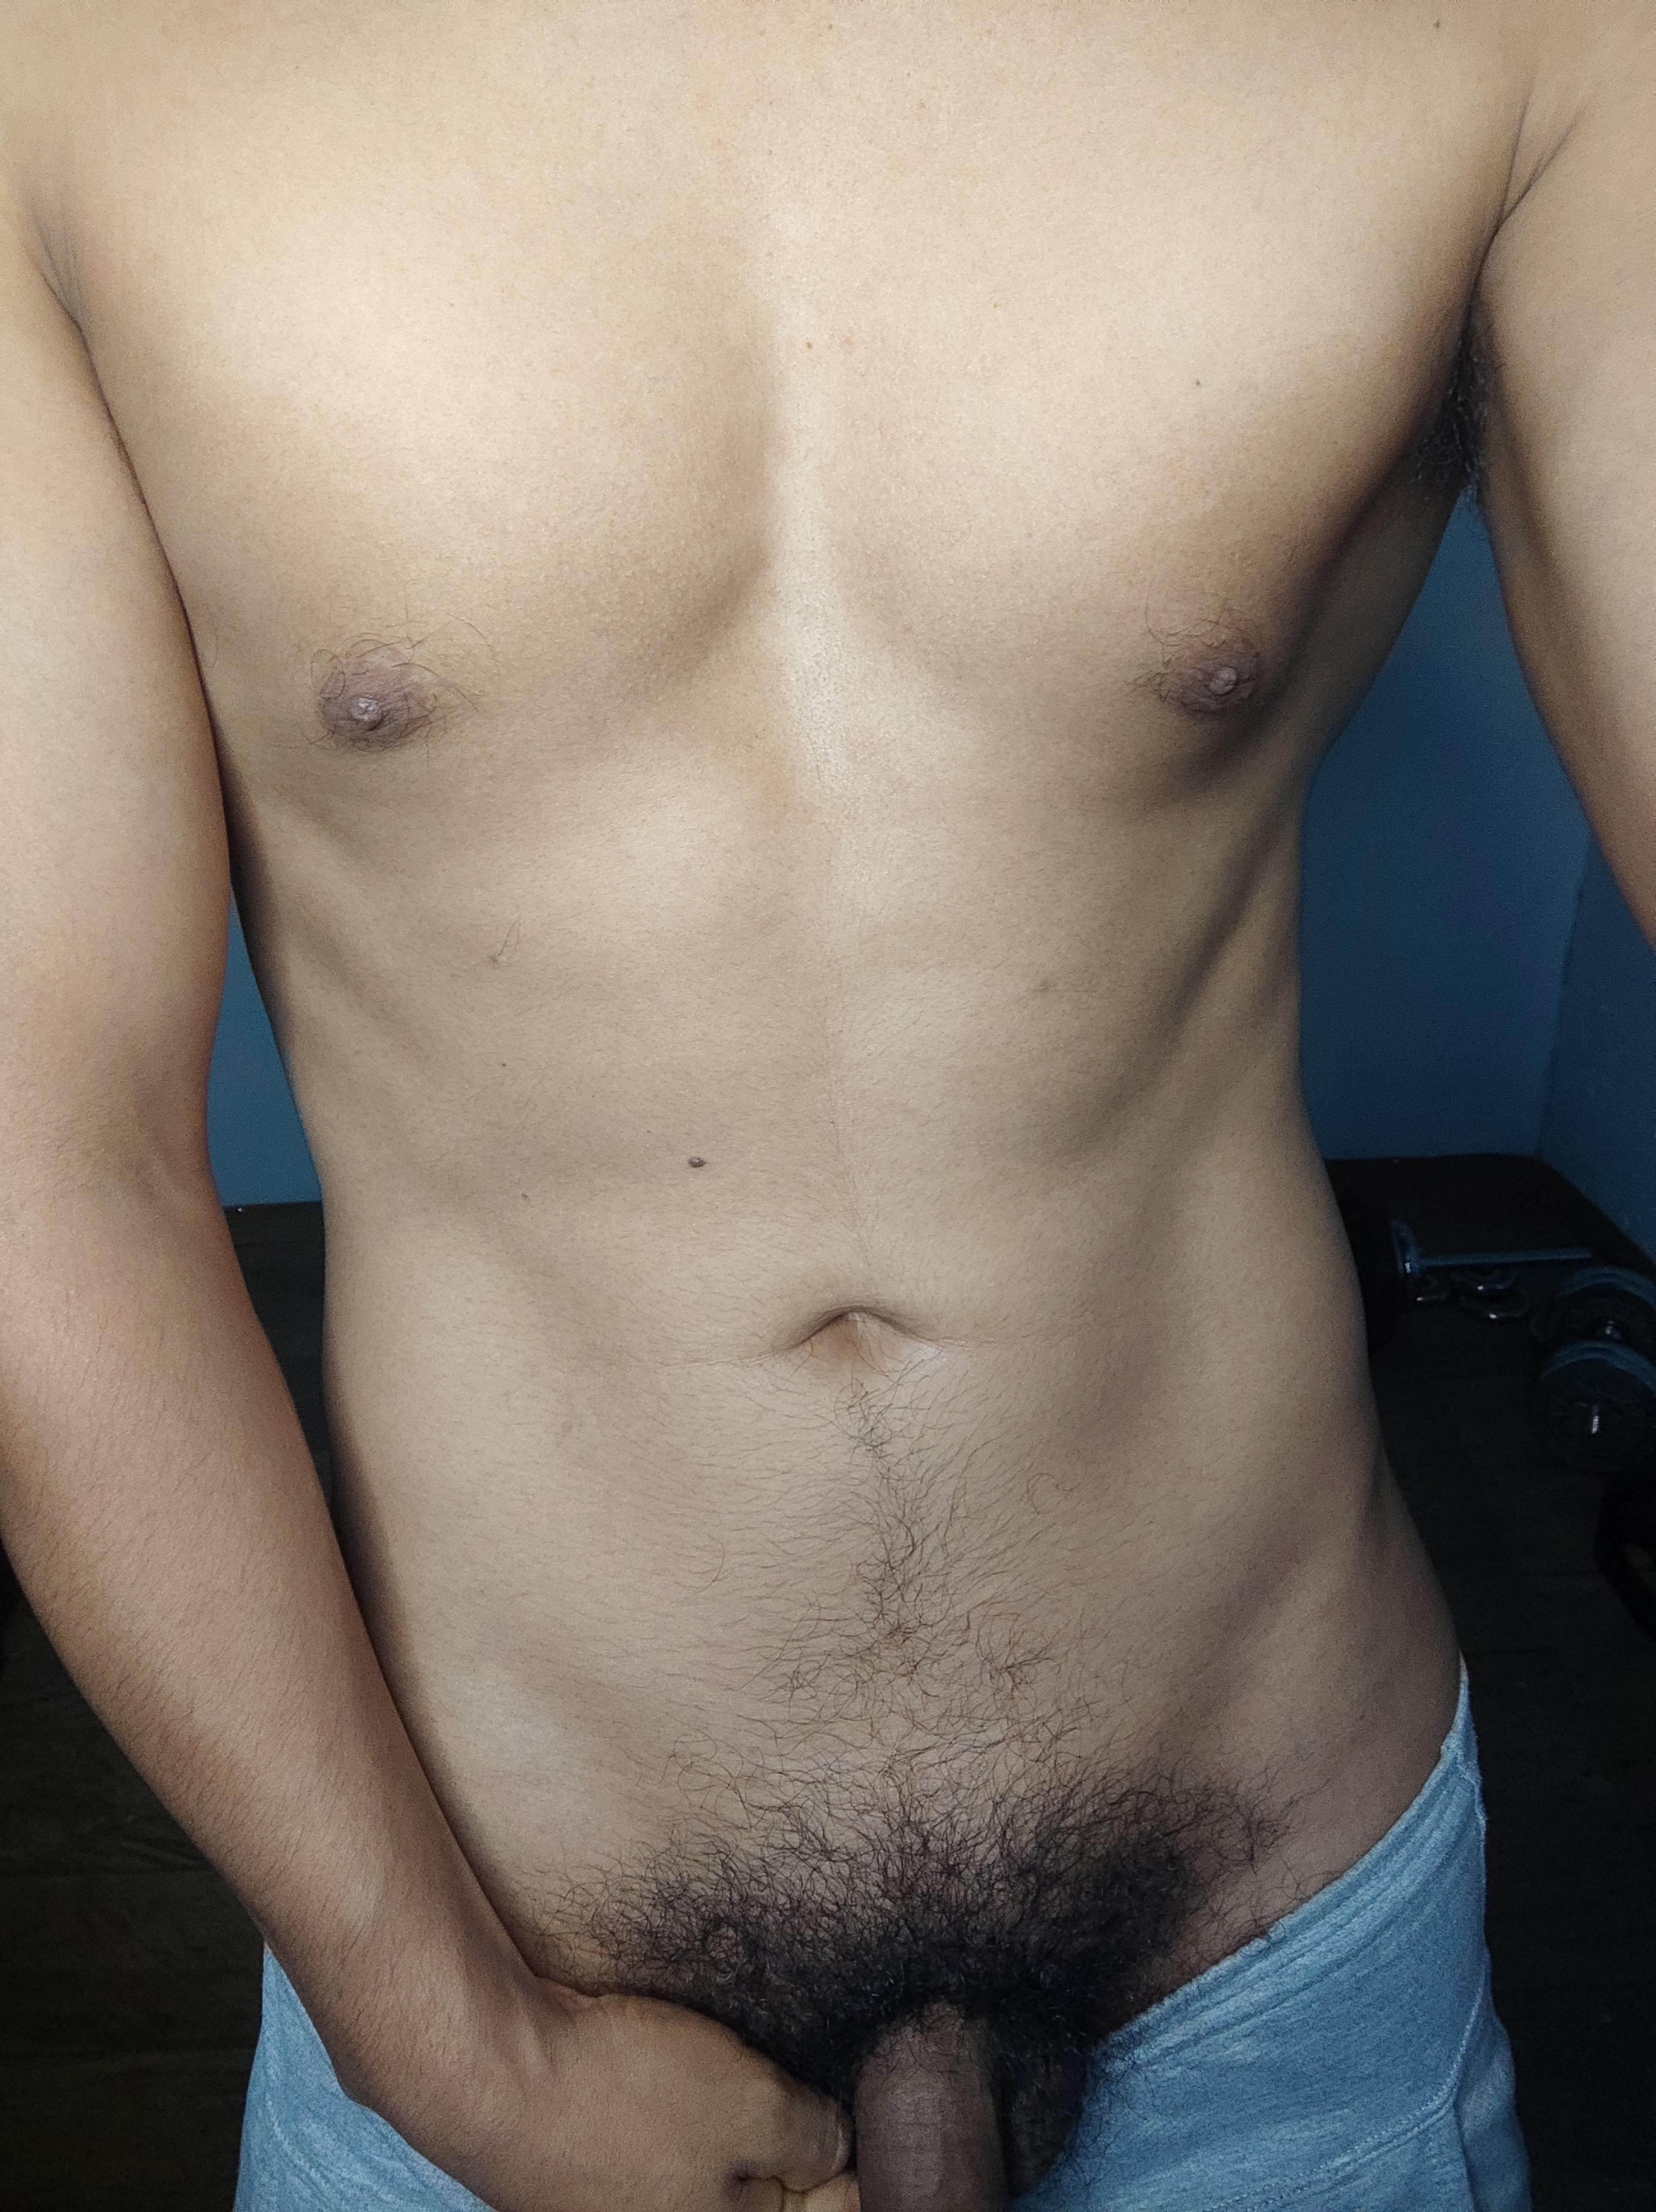 With pubes or without pubes